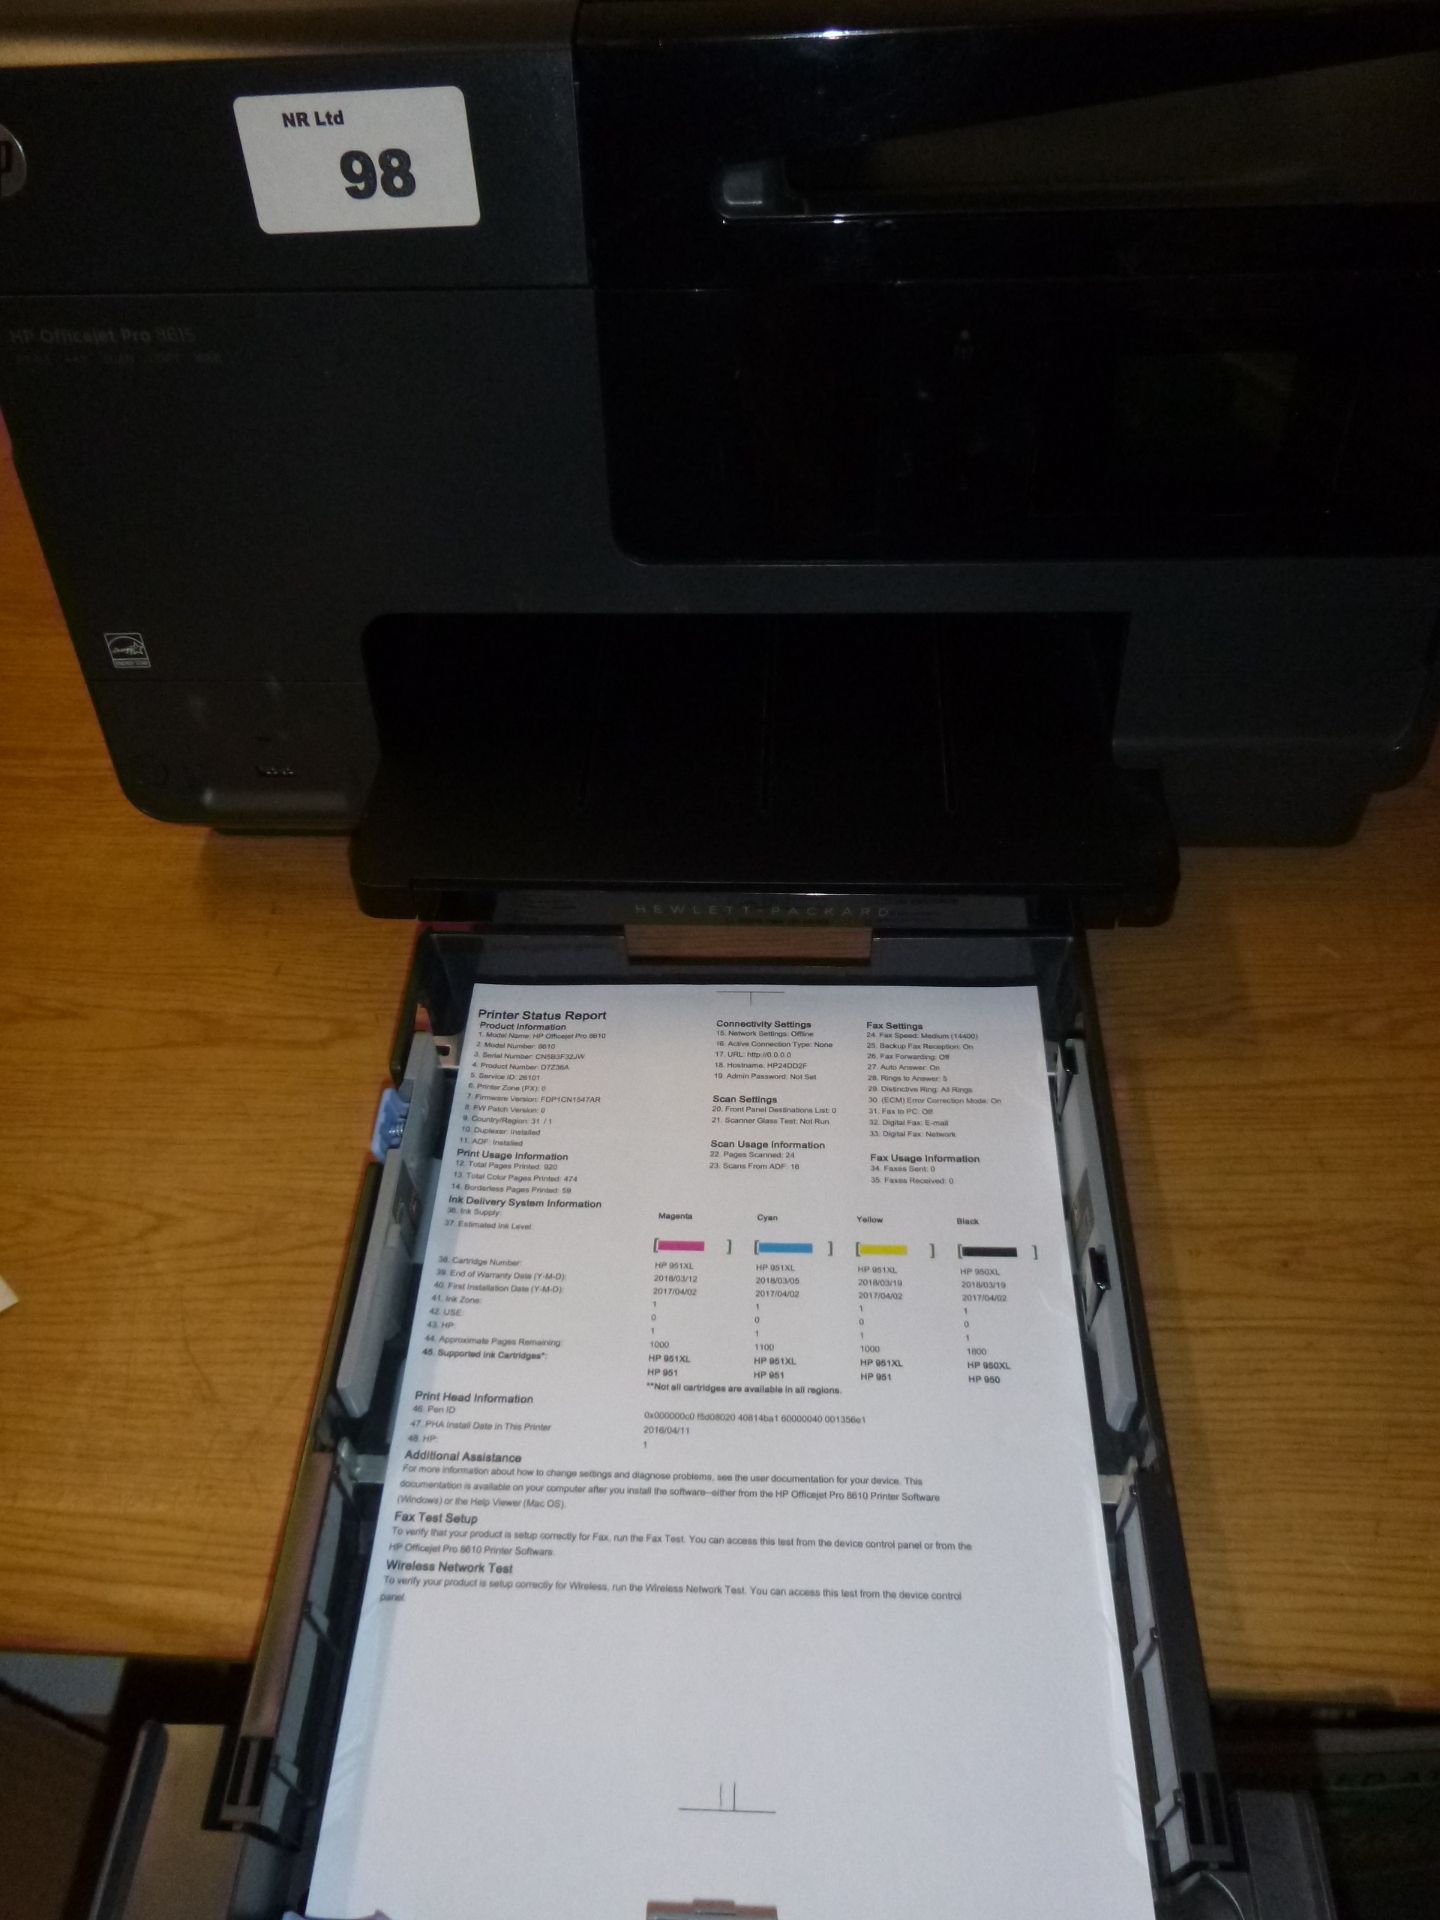 HP OFFICEJET PRO 8615 MULTIFUNCTION COLOUR PRINTER. PRINT/FAX/SCAN/COPY/WEB. WITH TEST PRINT - Image 2 of 2